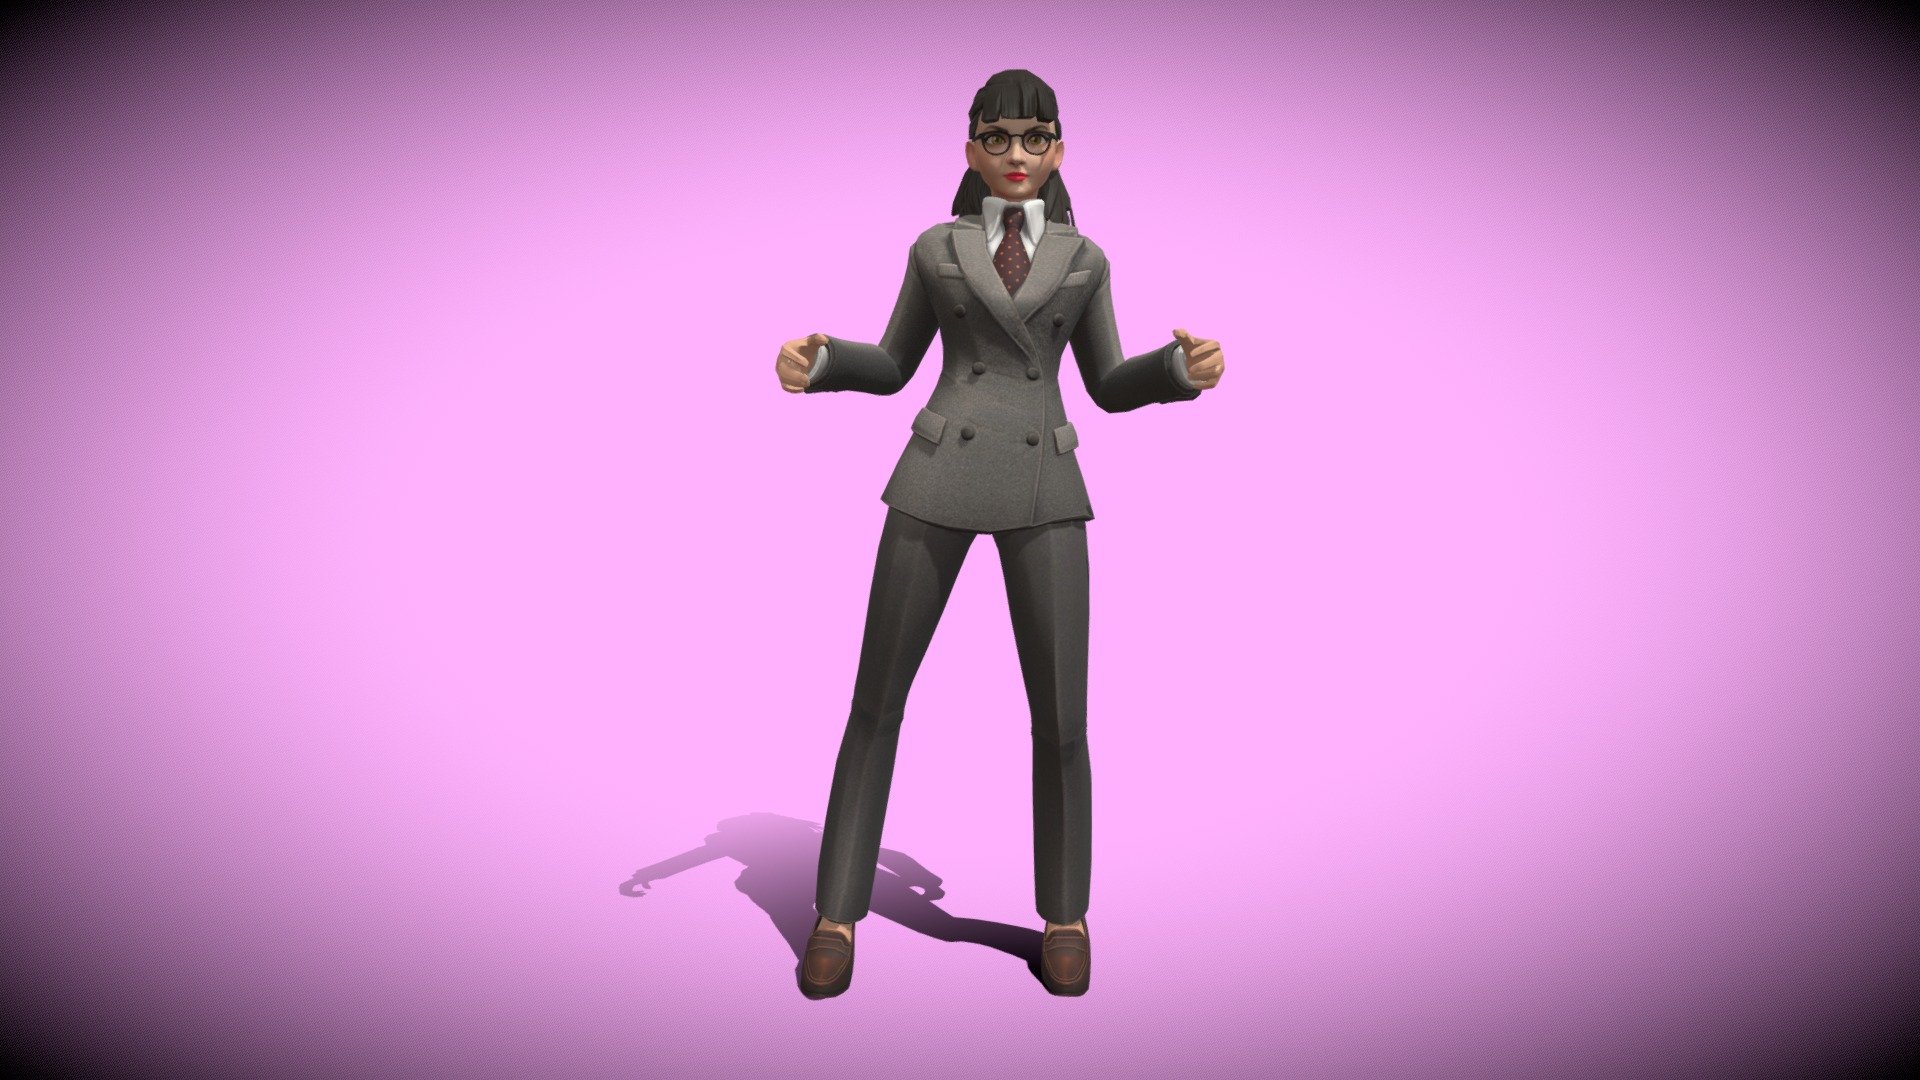 46 second animated female teacher dressed in a suit that stands and makes arm and hand gestures while she speaks. Rigged and ready for deployment into your project; game, virtual reality scene, augmented reality scene, or video. Add your own audio narration for a realistic voice presentation.

See this 3D model in action, and more models like it, here in this collection of free augmeneted reality apps:

https://morpheusar.com/ - Animated Female Teacher for Narration - Download Free 3D model by LasquetiSpice 3d model